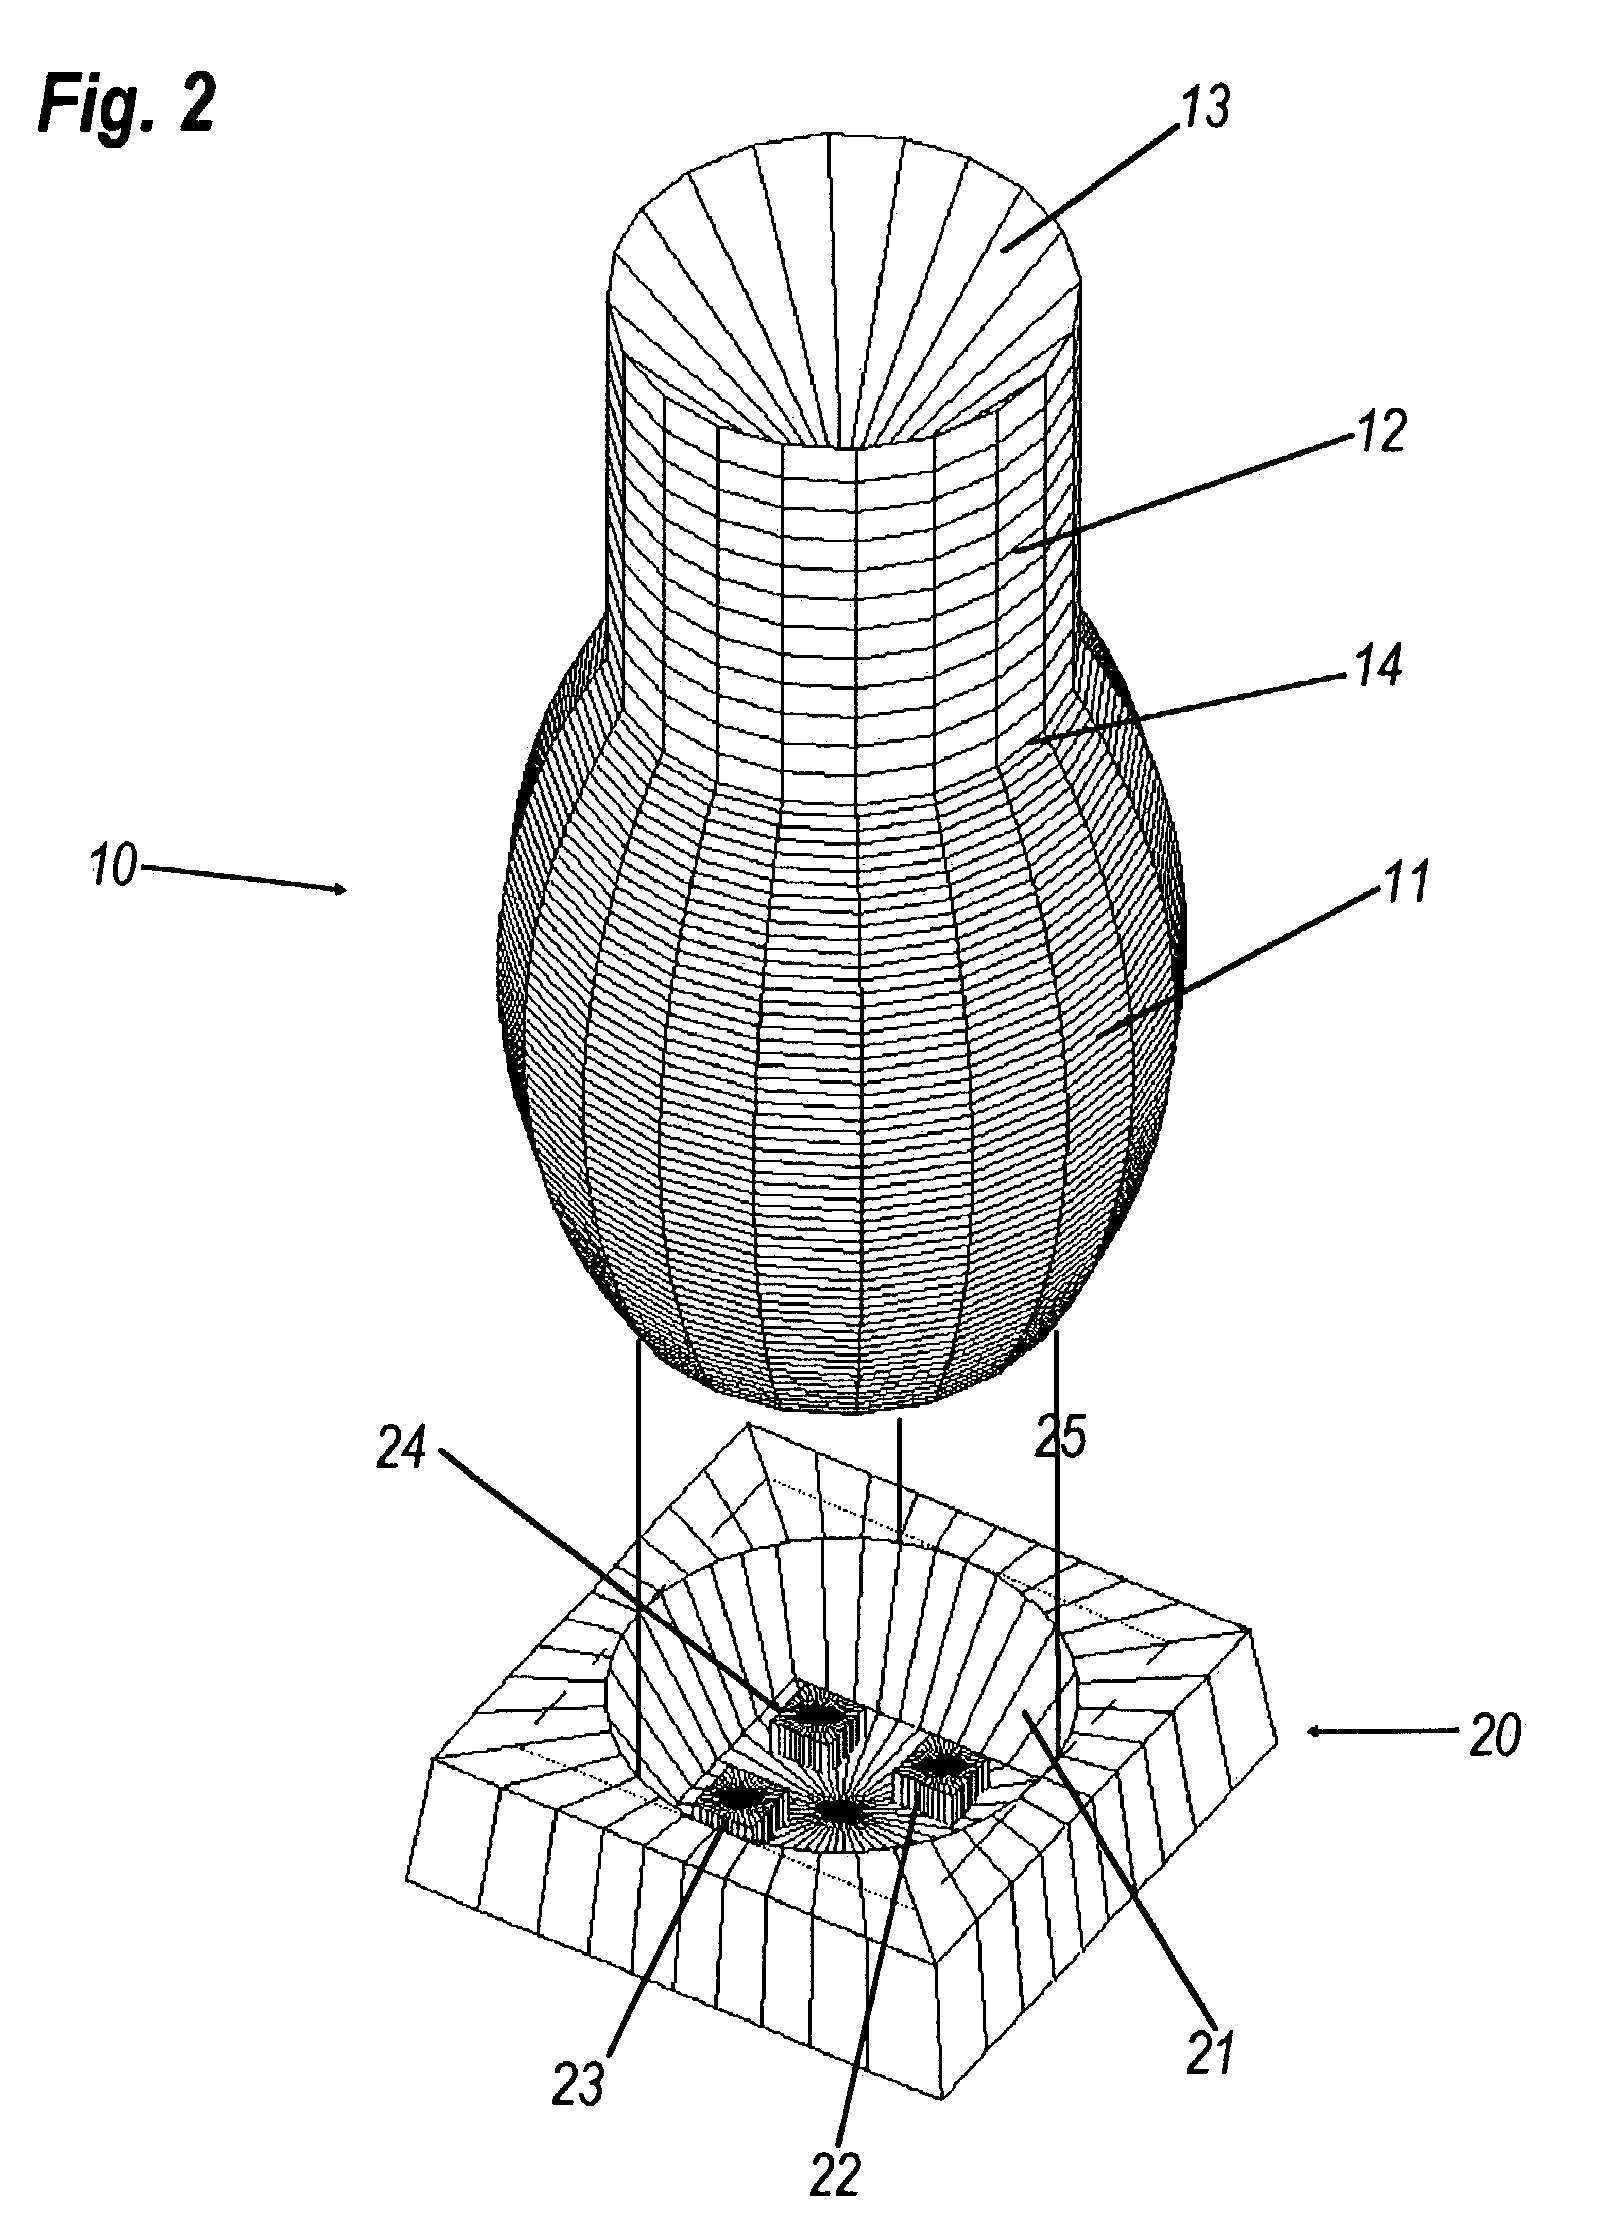 Optical device for repositioning and redistributing an LED's light